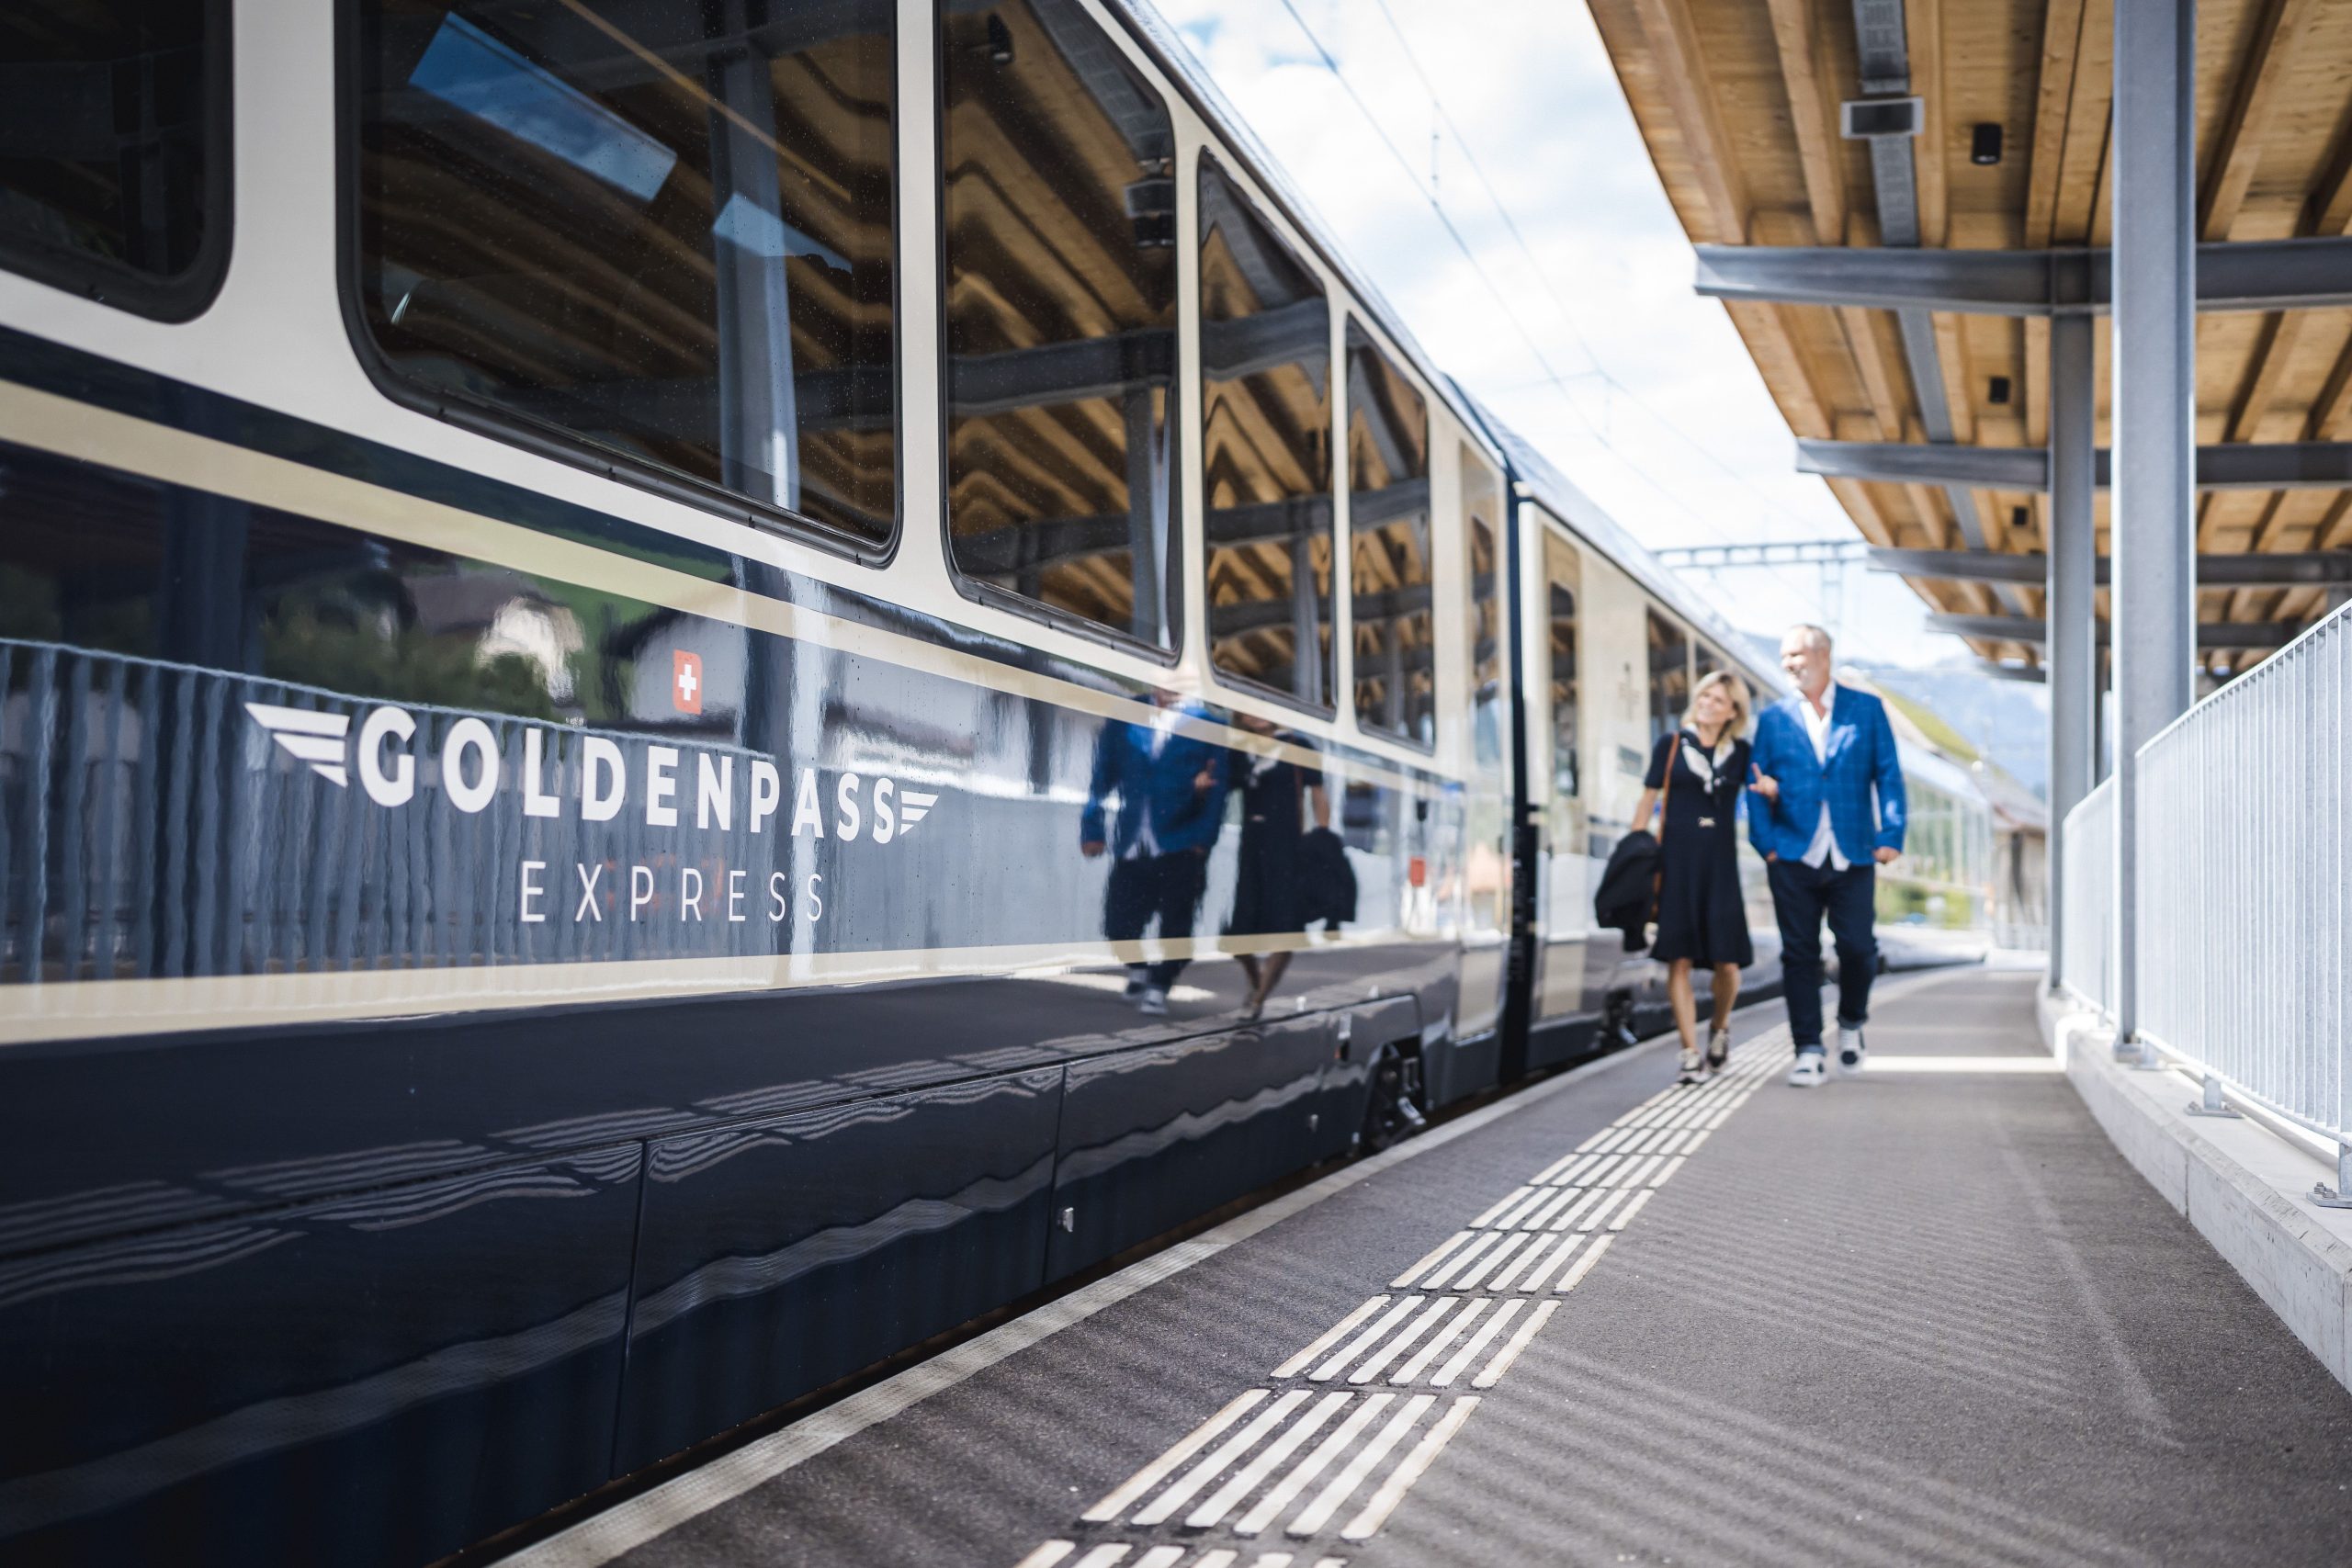 GoldenPass Express train at the station